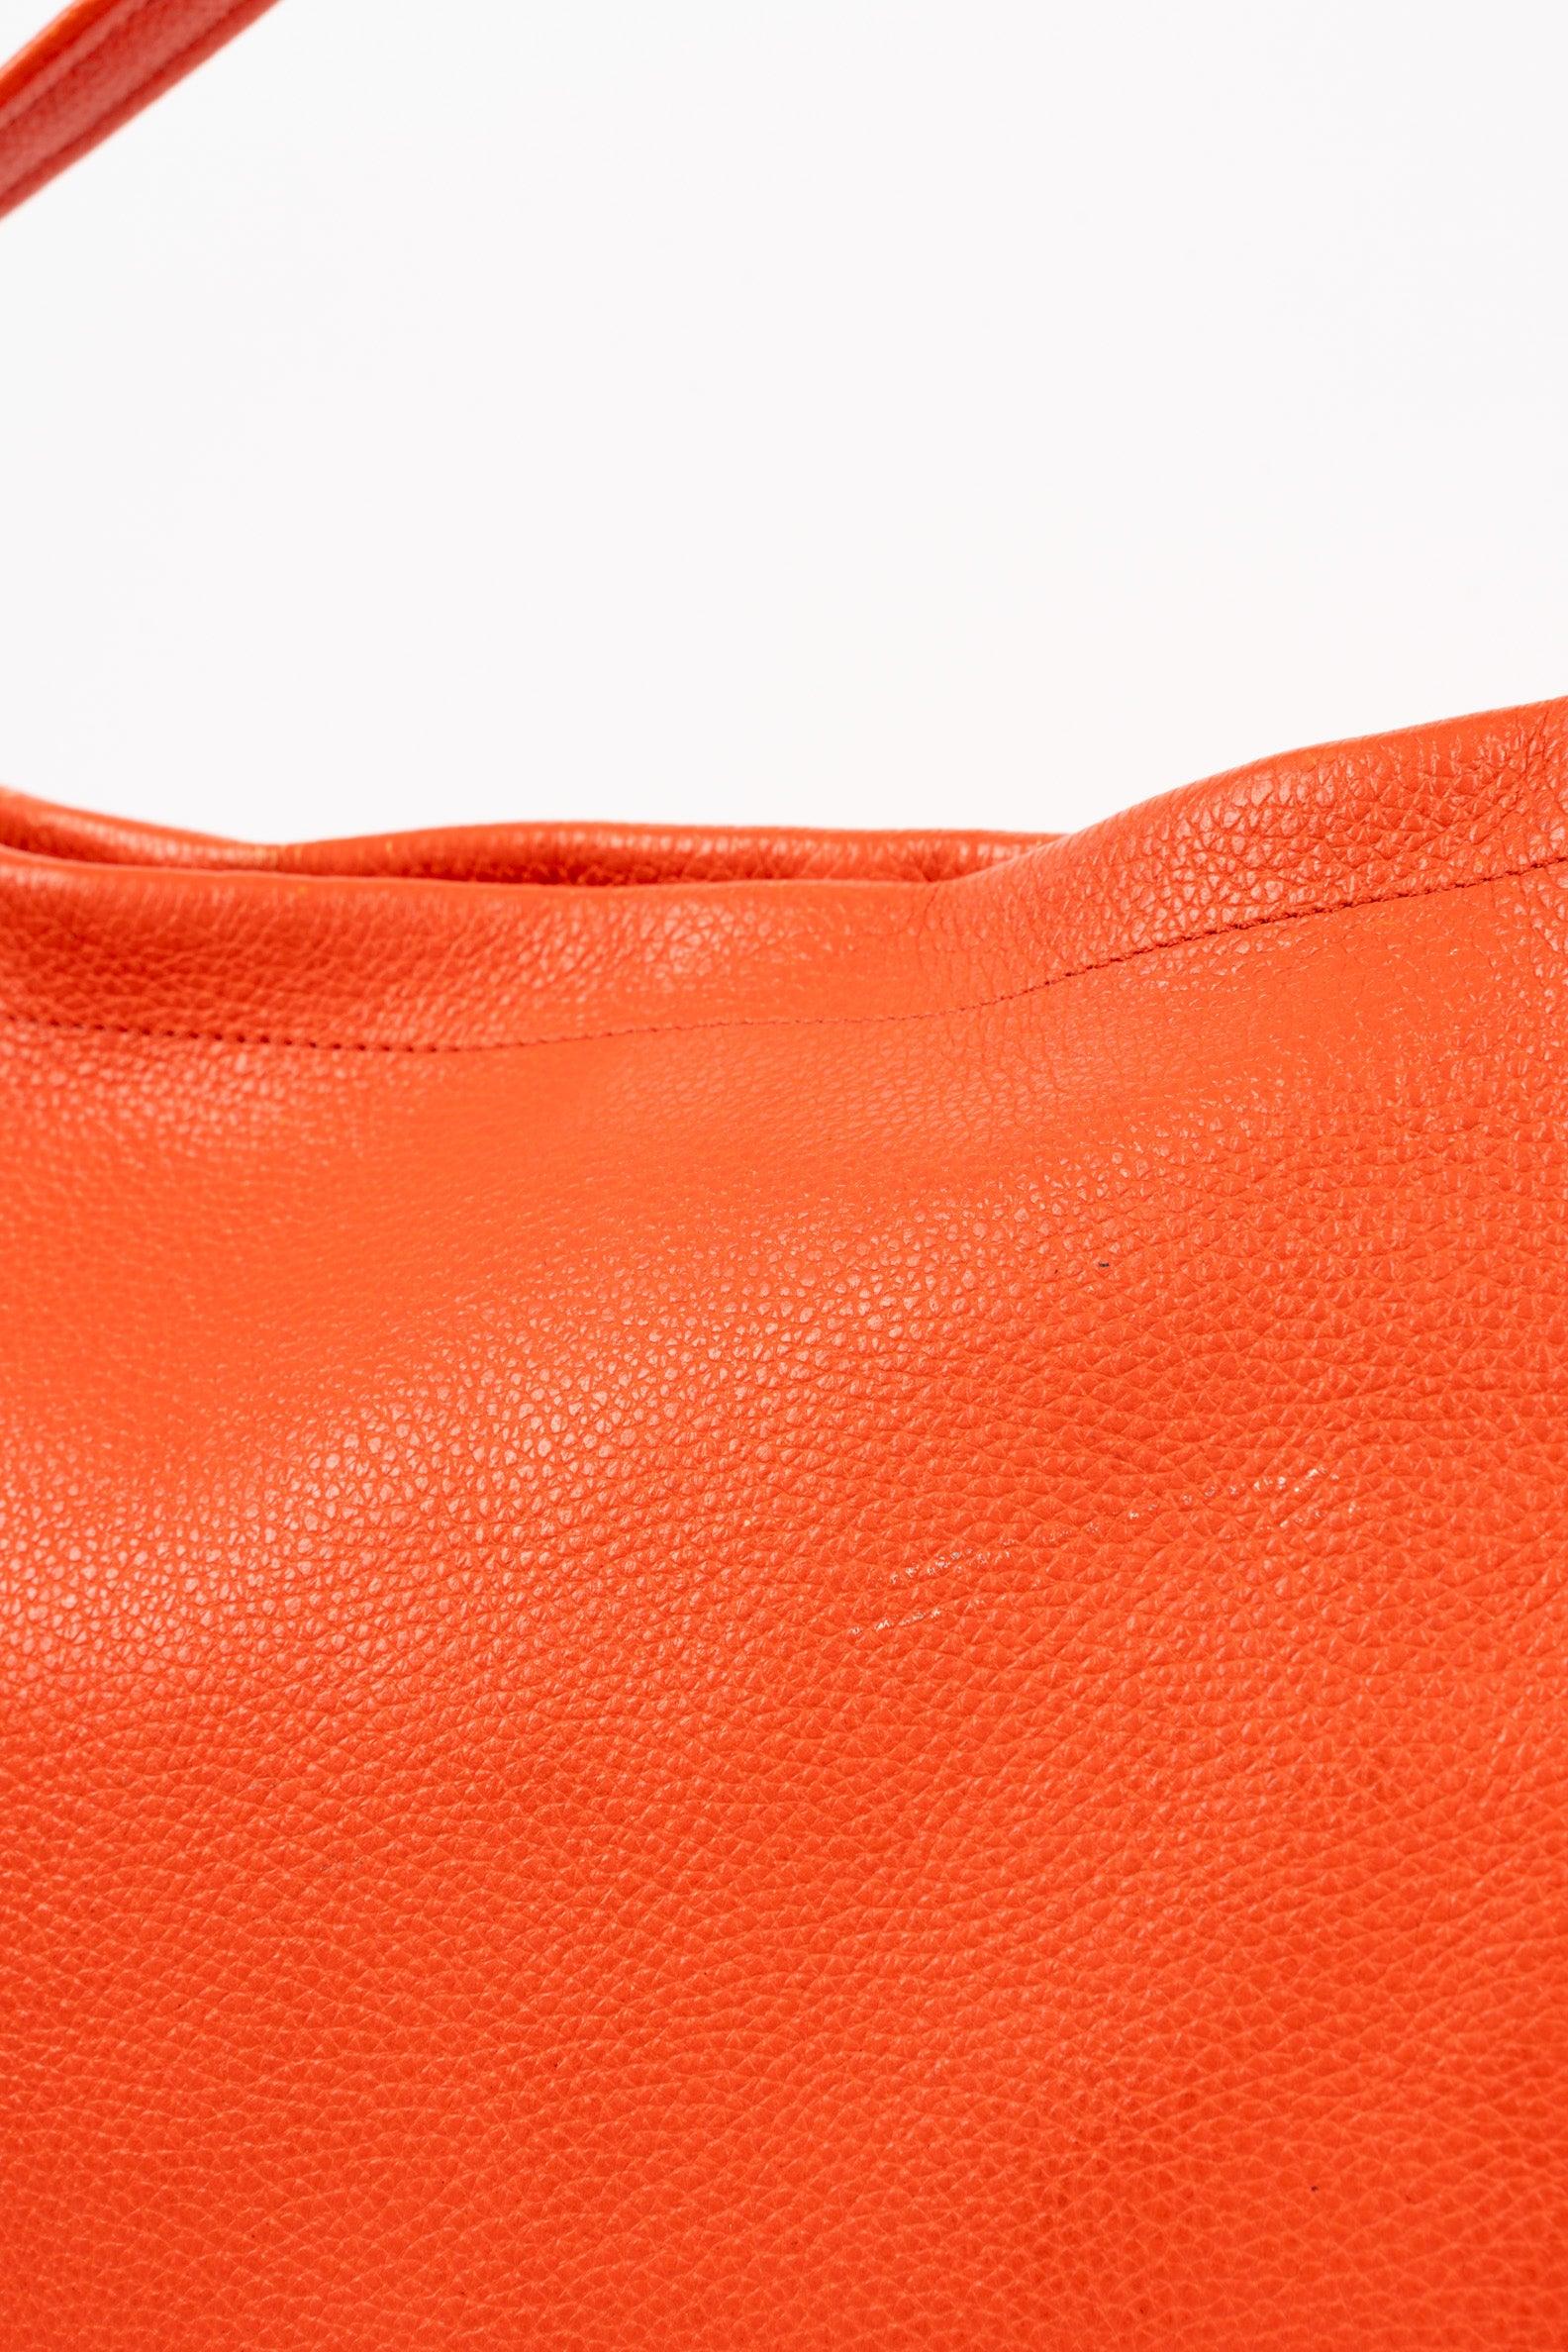 Red Leather Bag - Volver